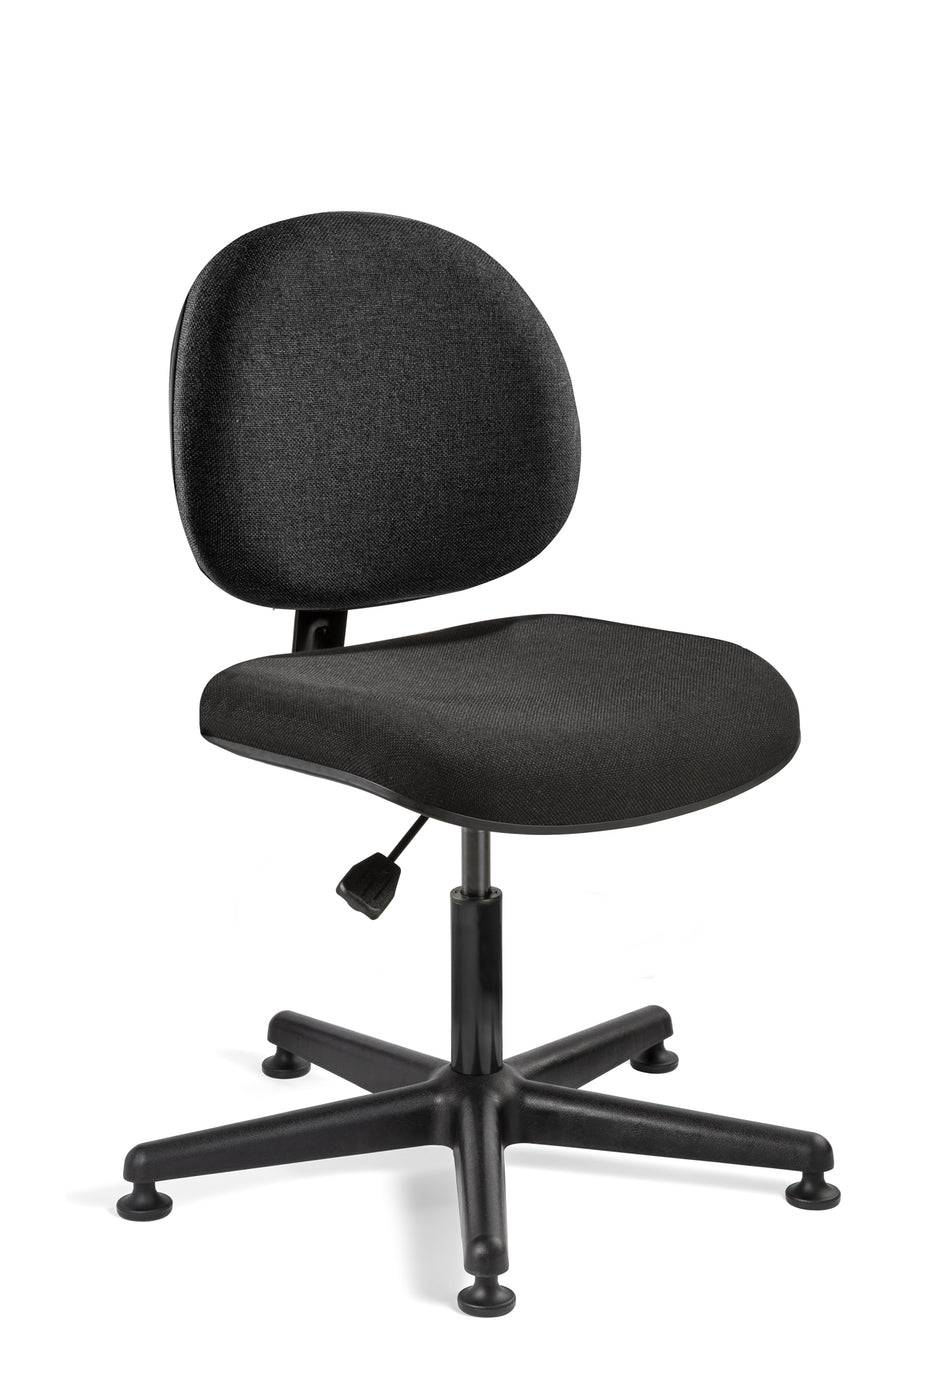 New Lex Wearable Chair For Sale for Small Space